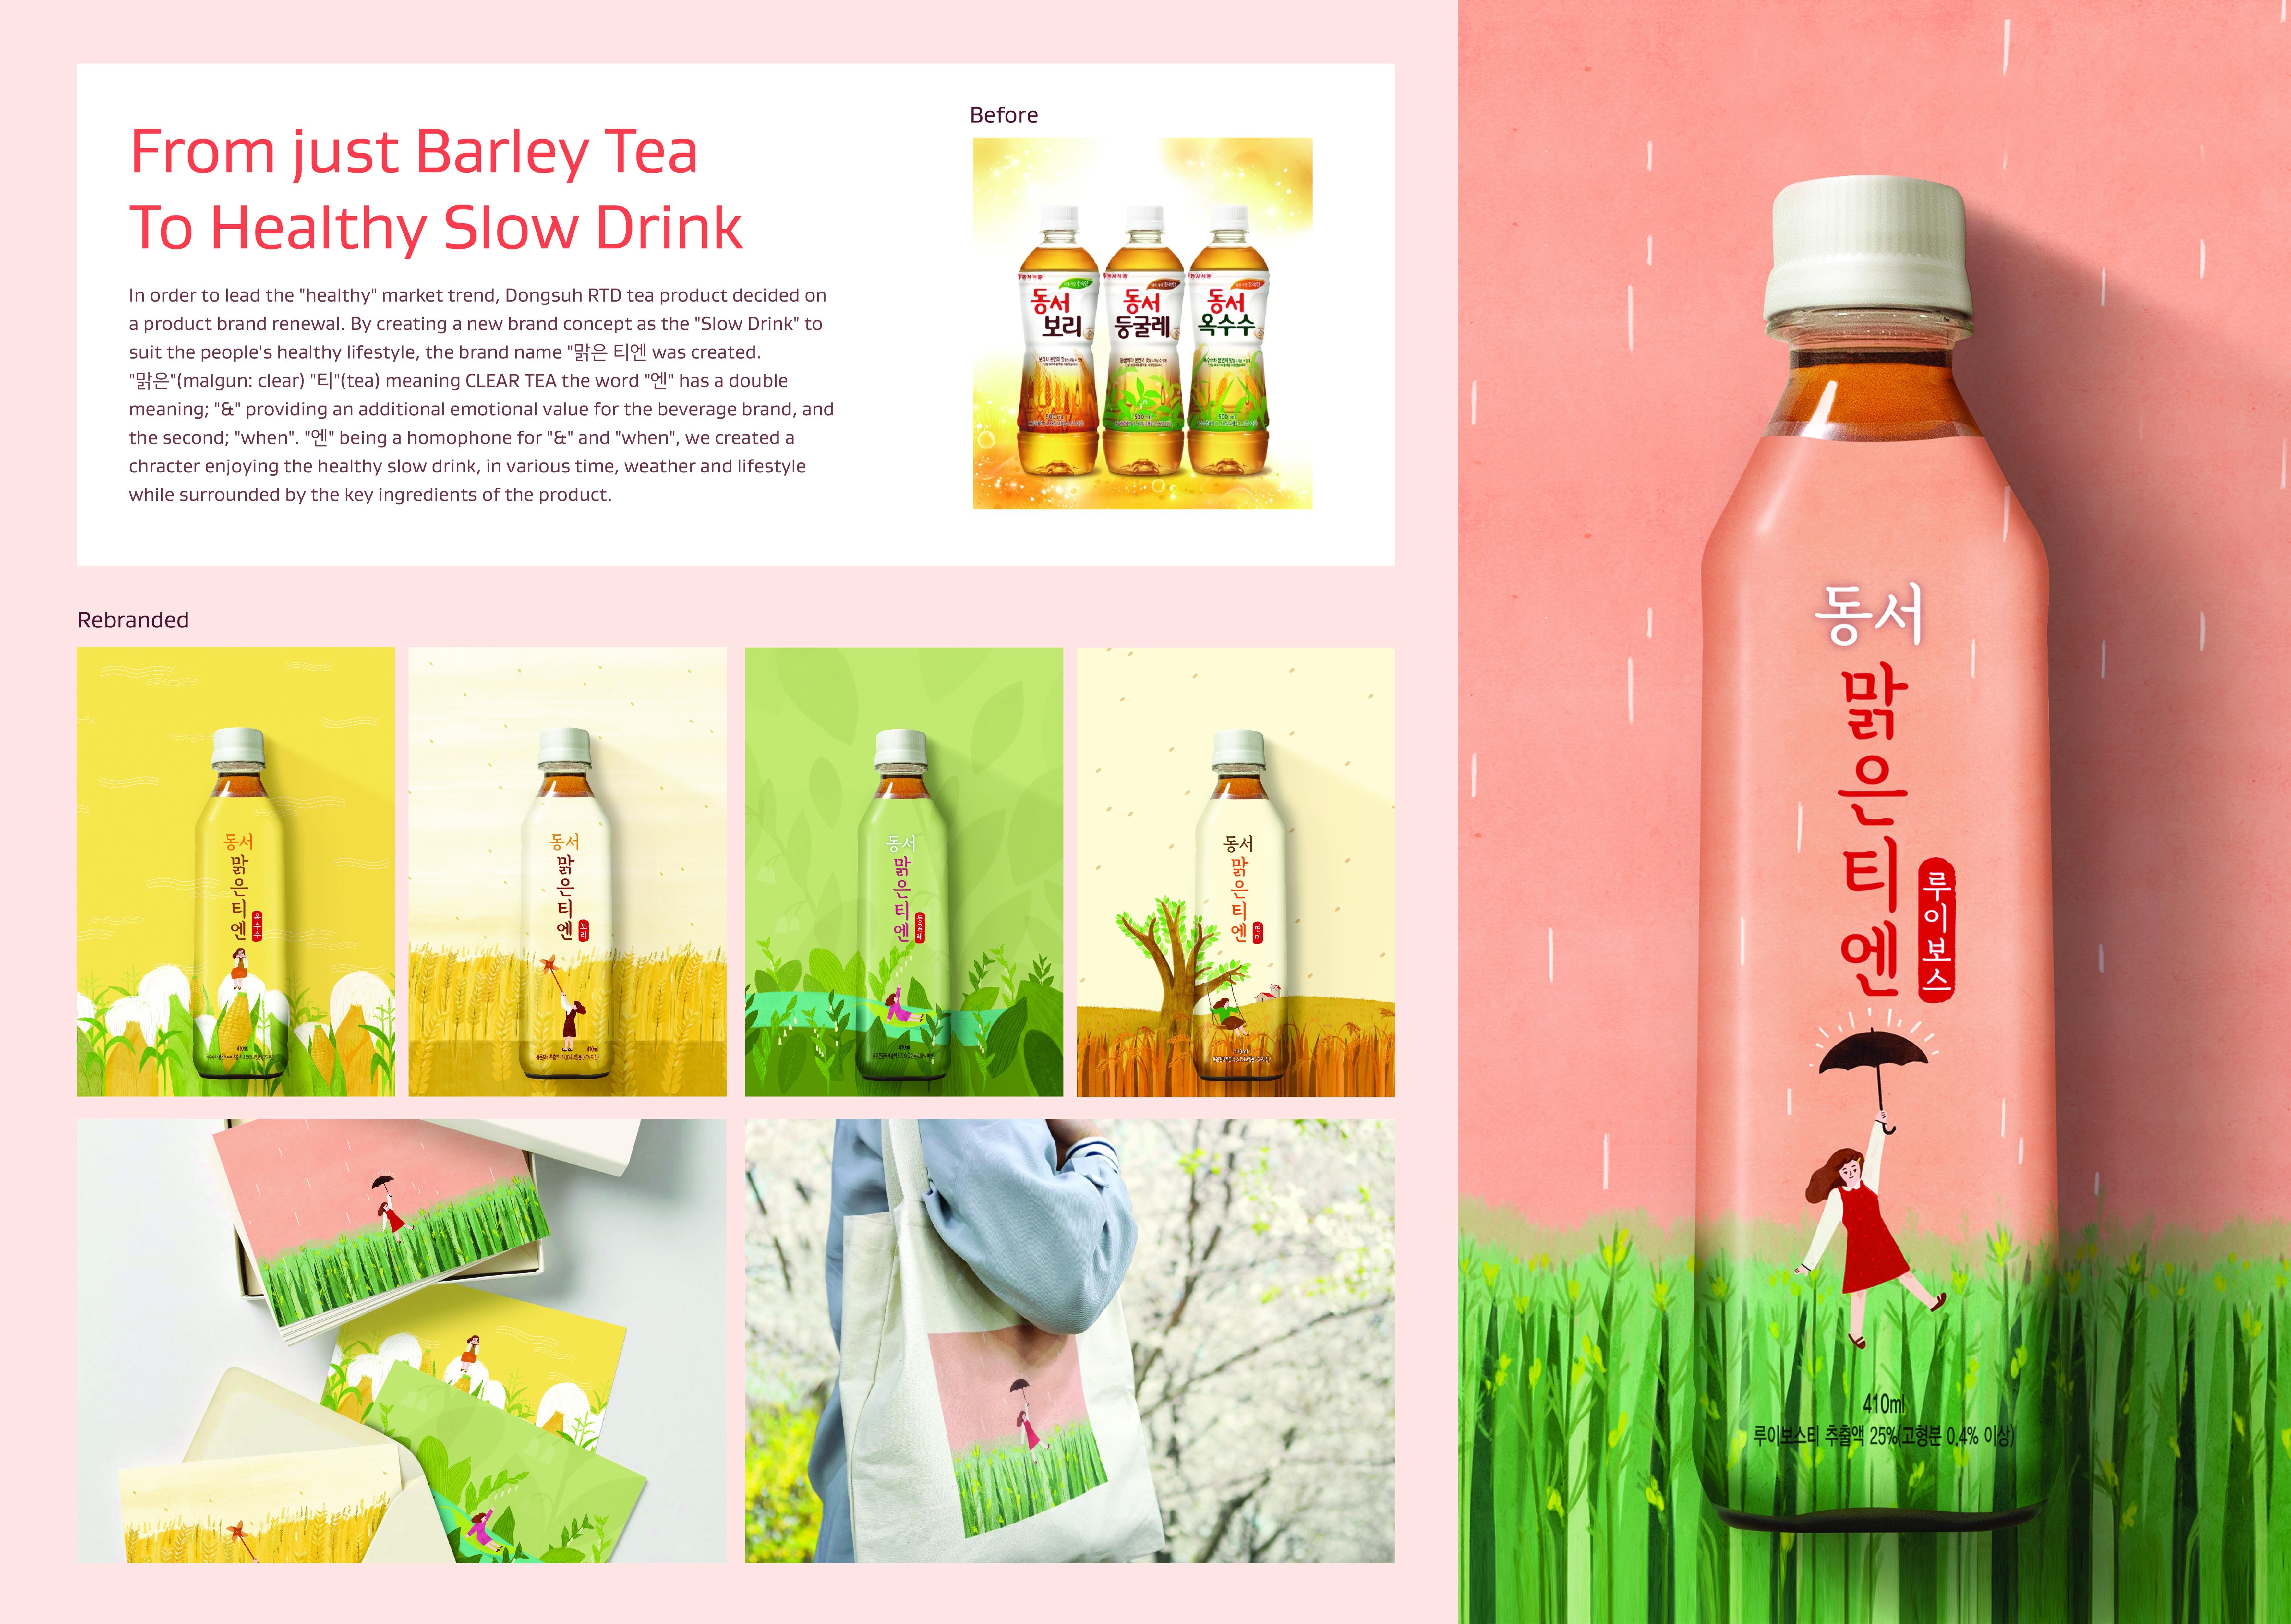 From just Barley Tea to Healthy Slow drink